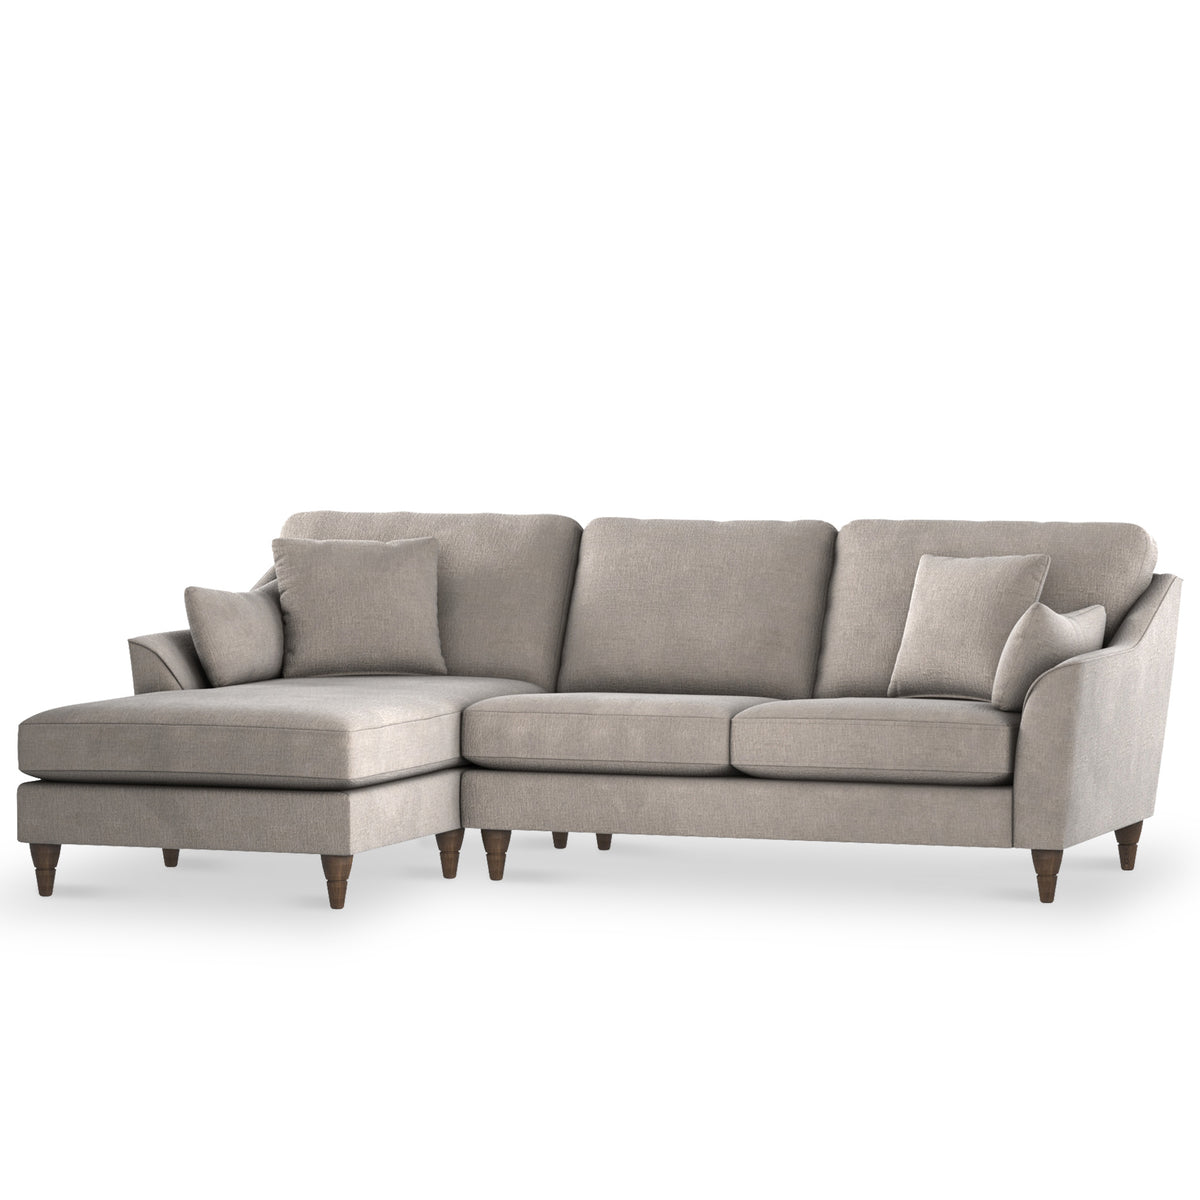 Charice Fog Grey Left Hand Chaise Sofa from Roseland Furniture